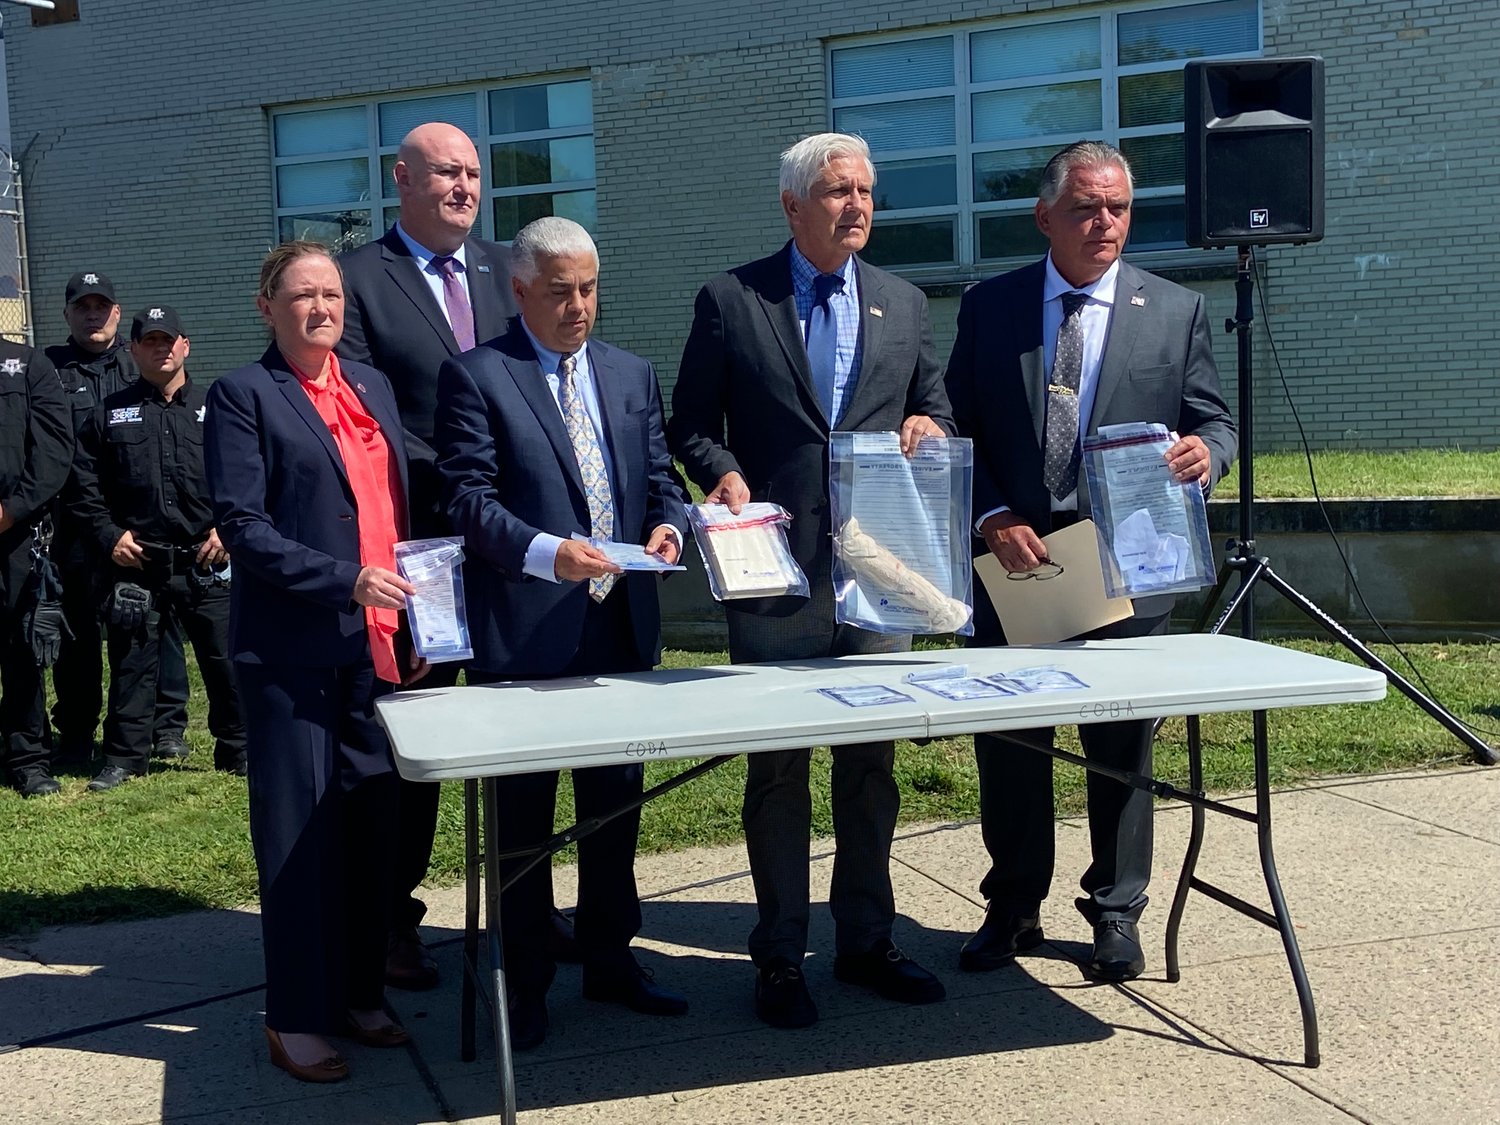 Blakeman, second from right, with officials from the Nassau County Correctional Center, displayed the contraband that “Operation Clean Slate” turned up in the jail. Items included weapons and drugs.